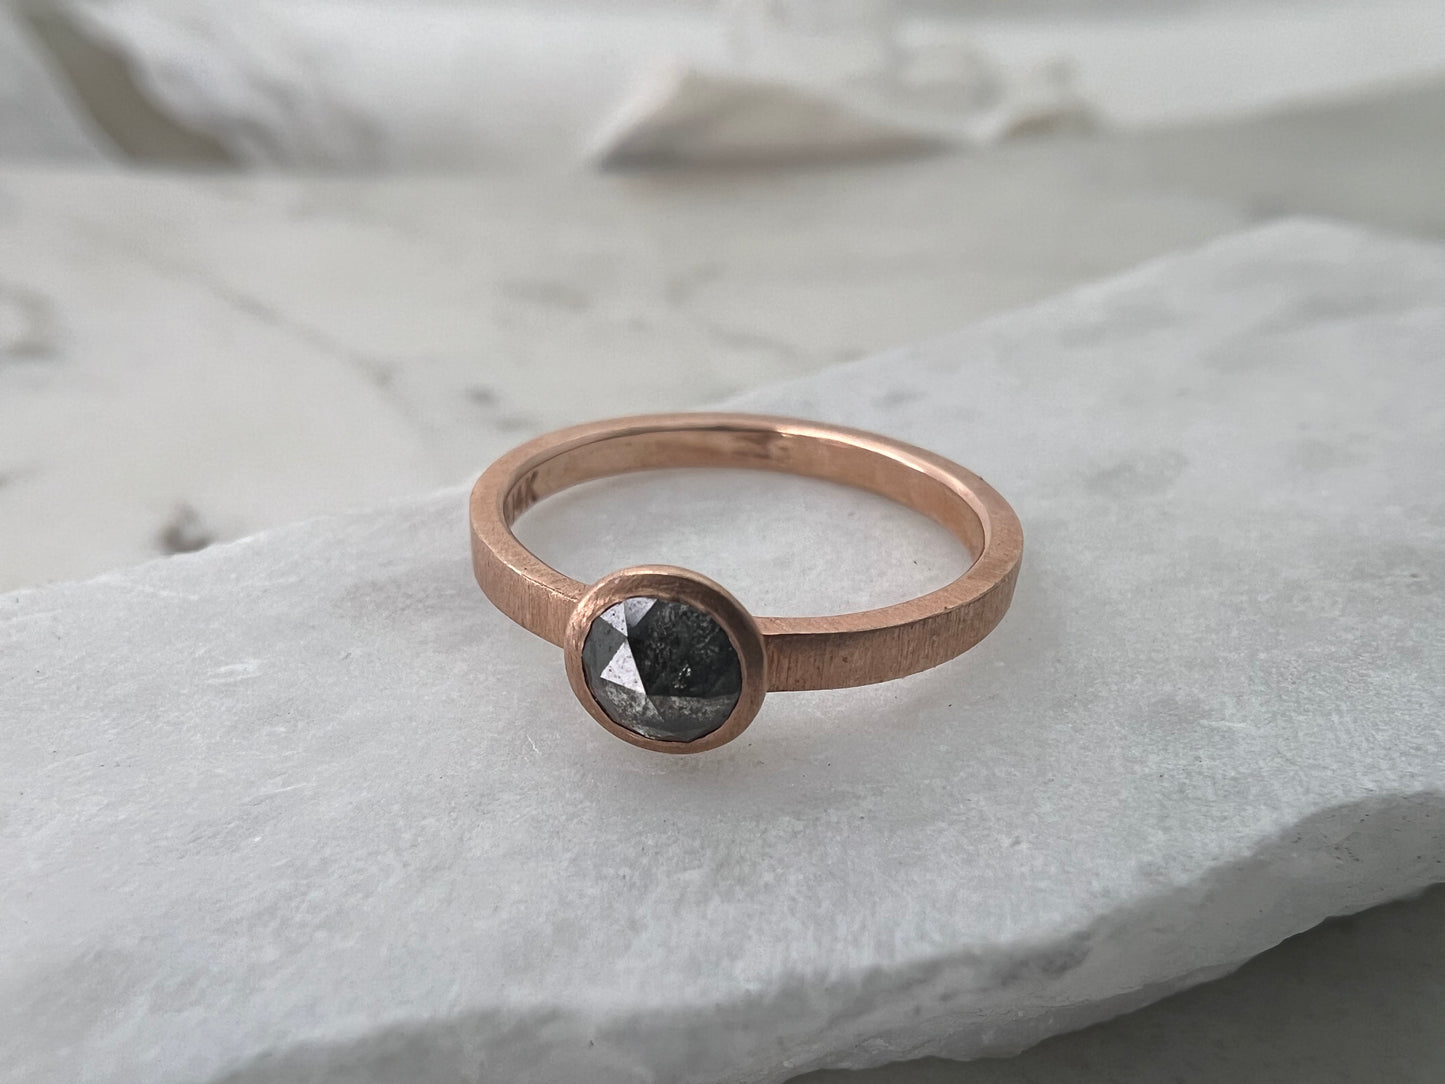 Half Carat Rose Cut Diamond Solitaire Engagement Ring with low tapered bezel in matte 14k rose gold, size 4.75